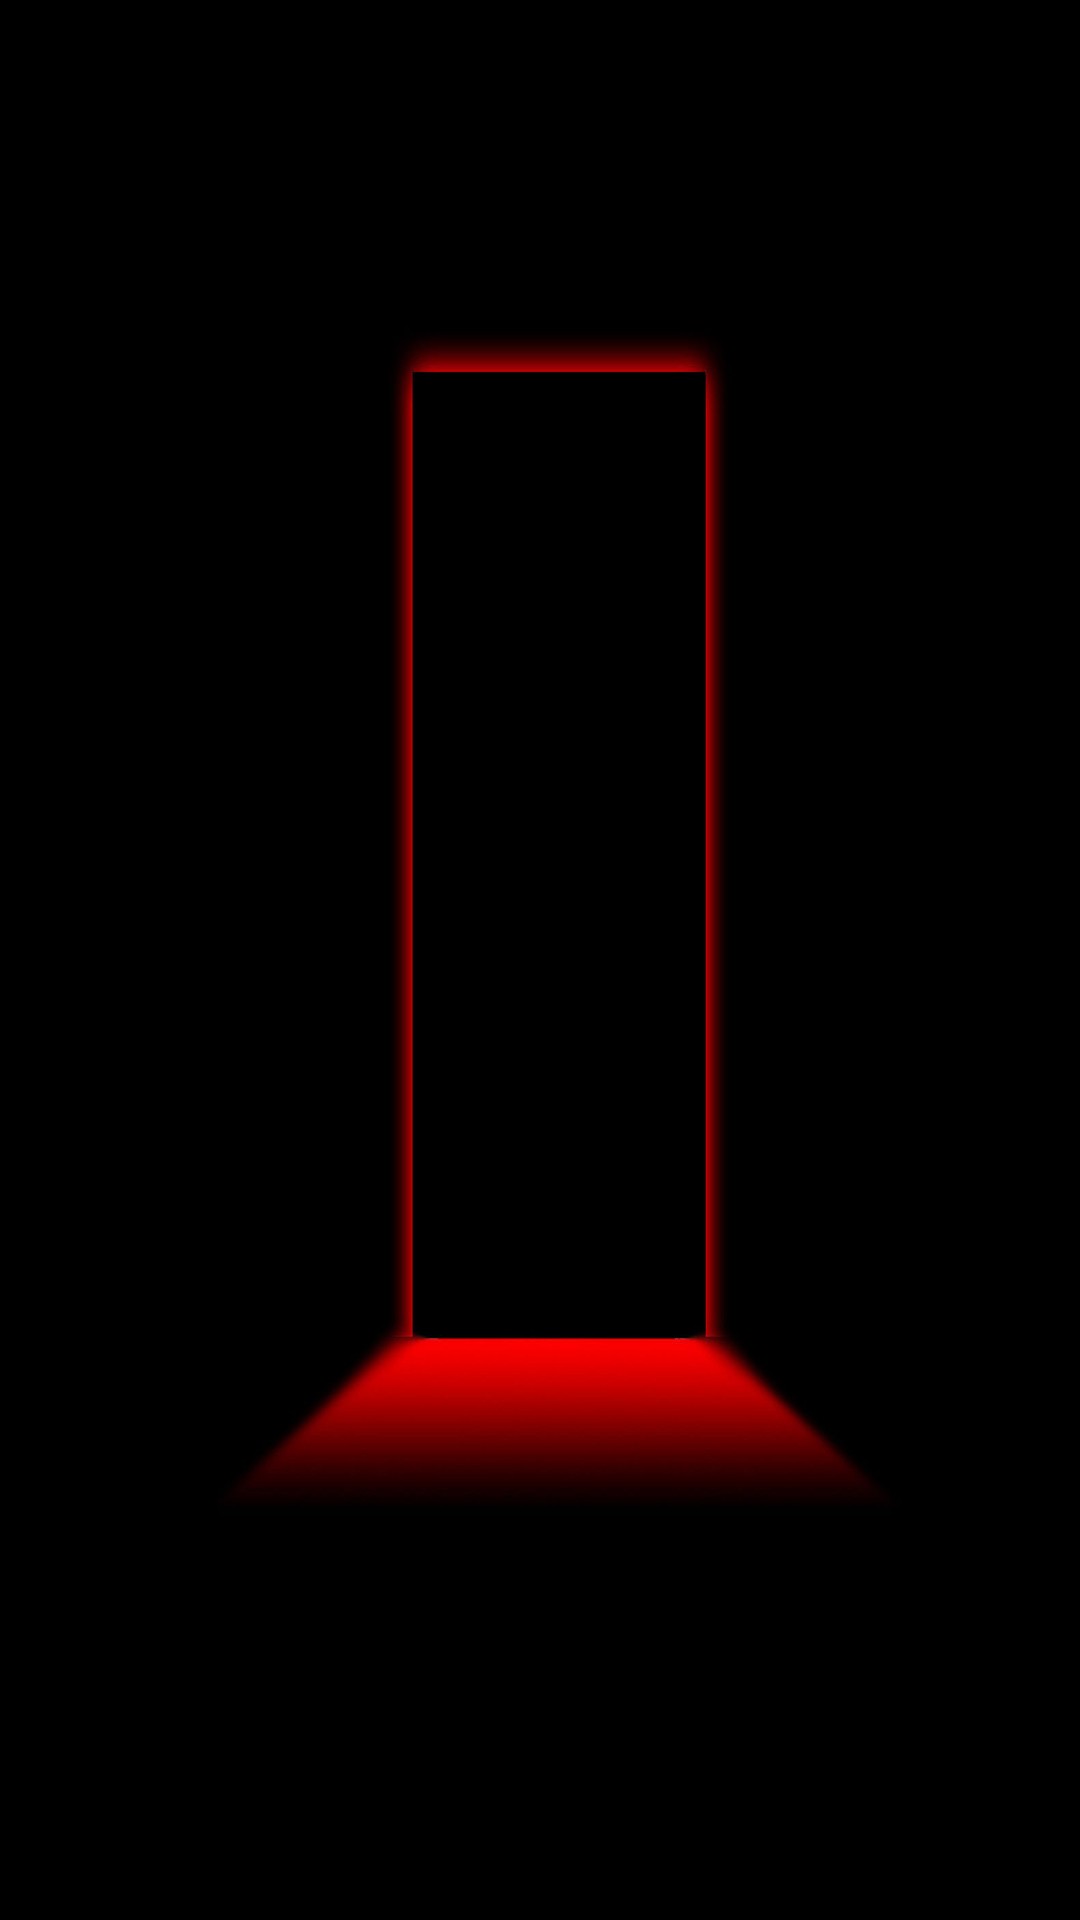 3D Black and Red iPhone Wallpaper resolution 1080x1920